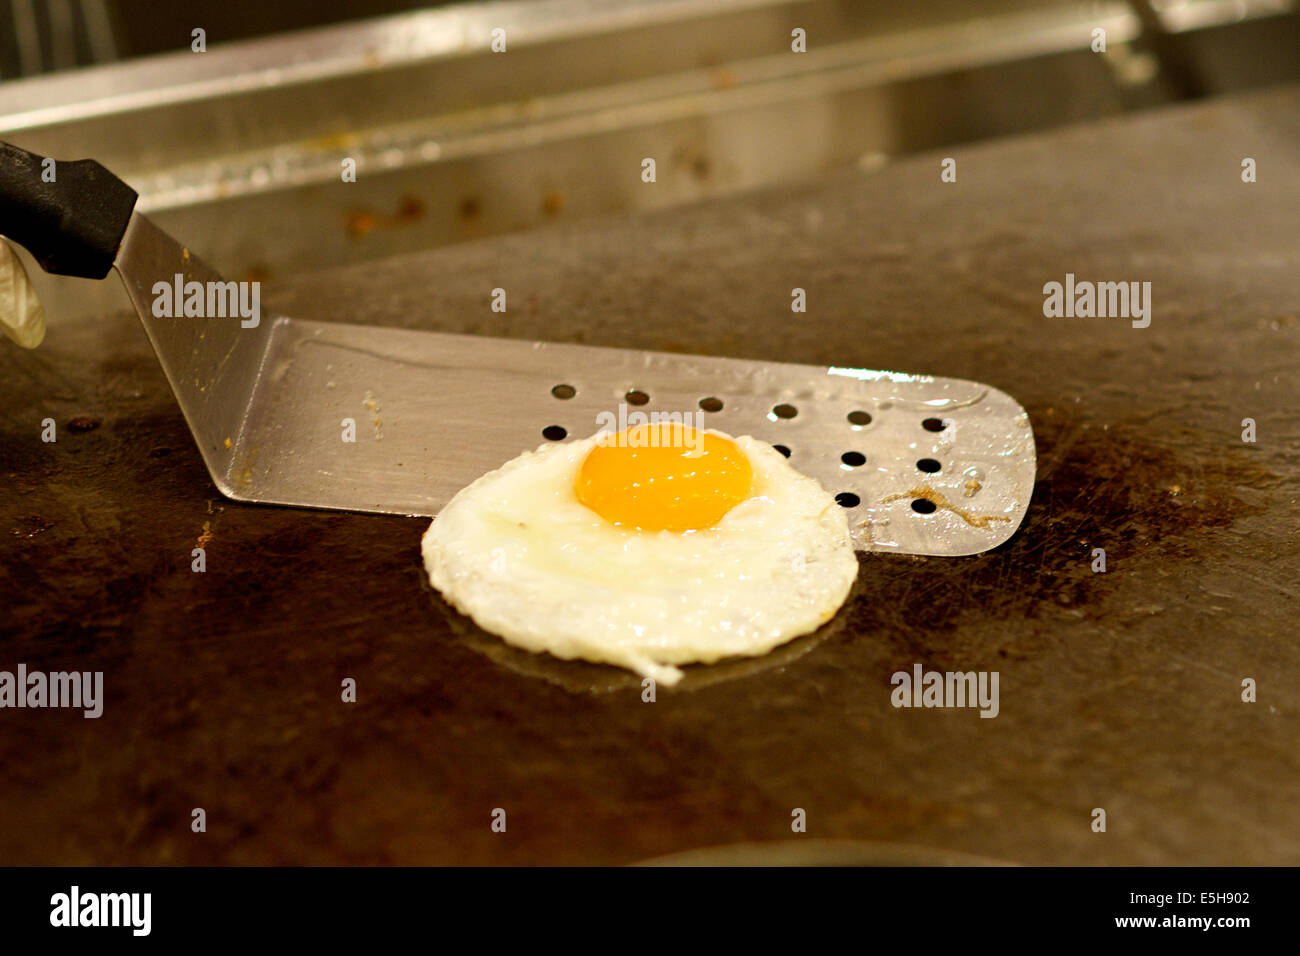 Frying a sunny side up egg in a hotel restaurant Stock Photo